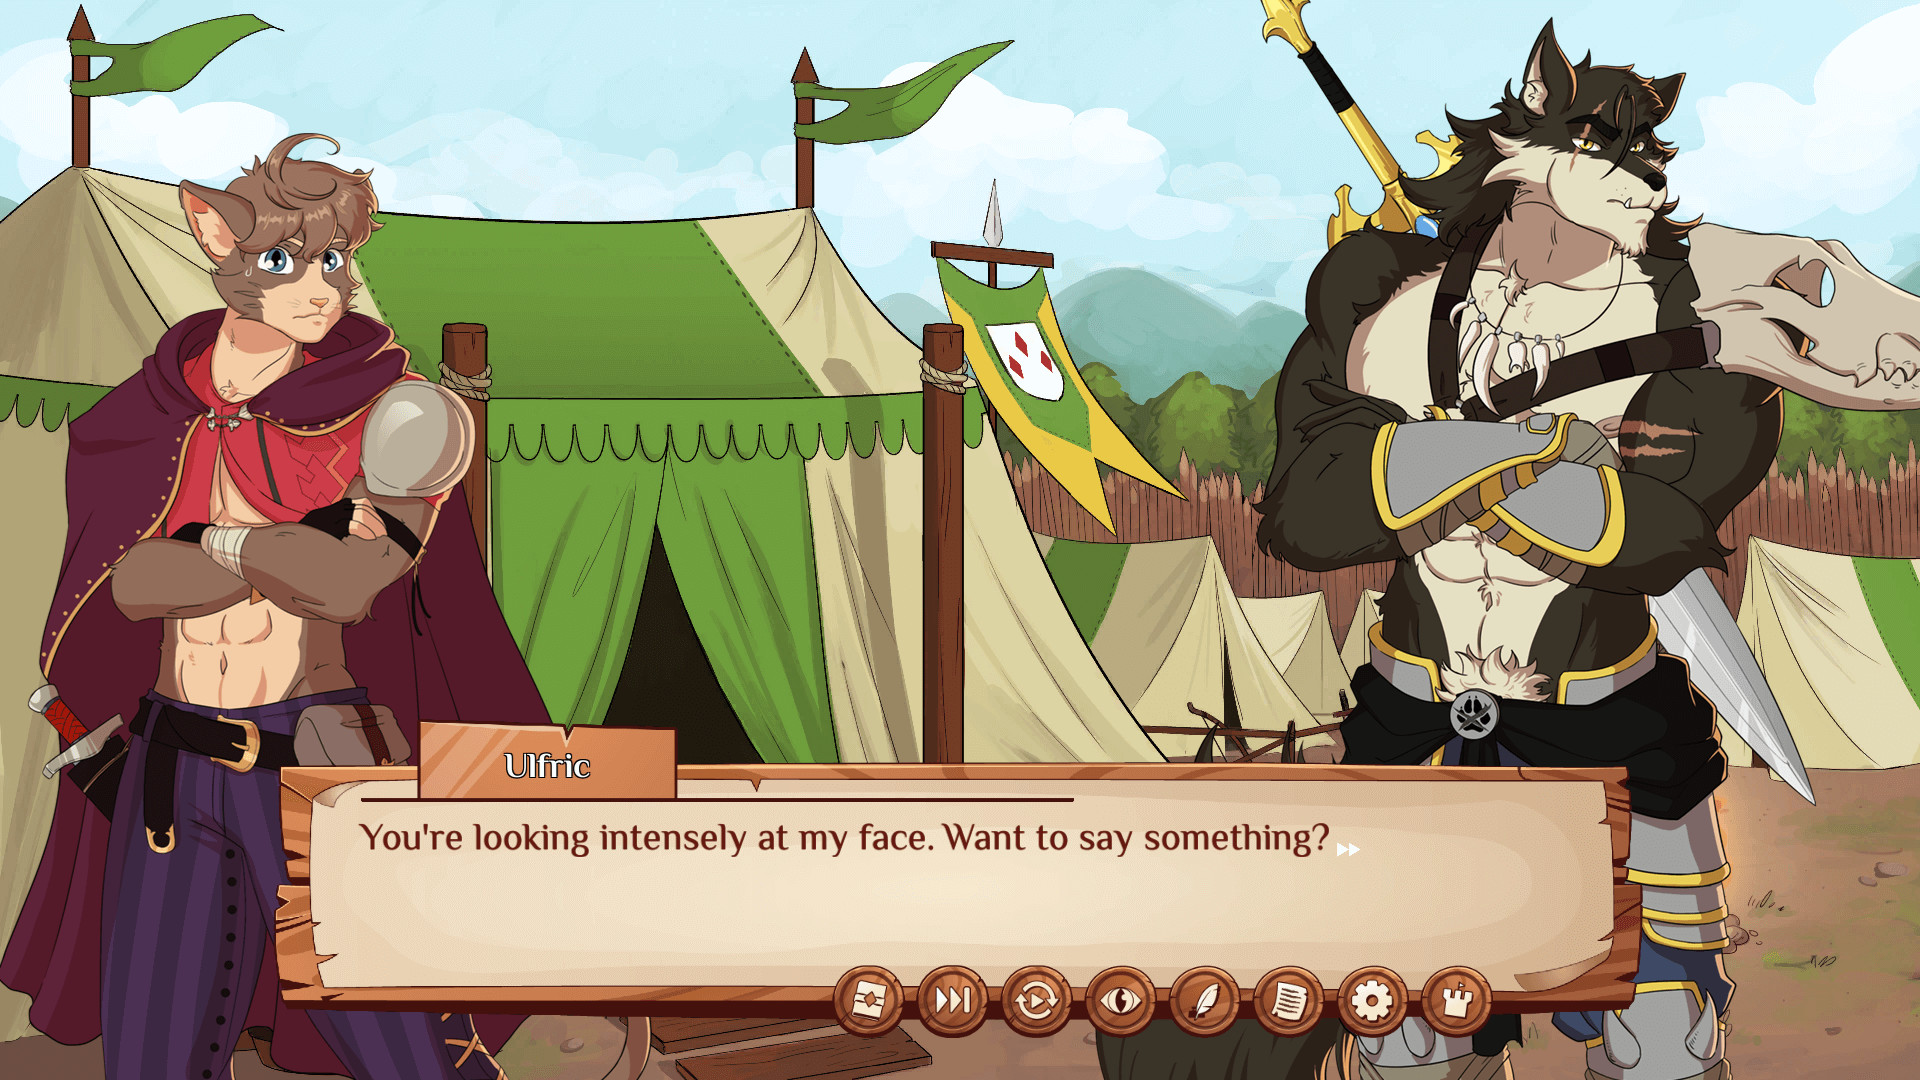 World of Furries, multiplayer RPG online browser game by Itchy